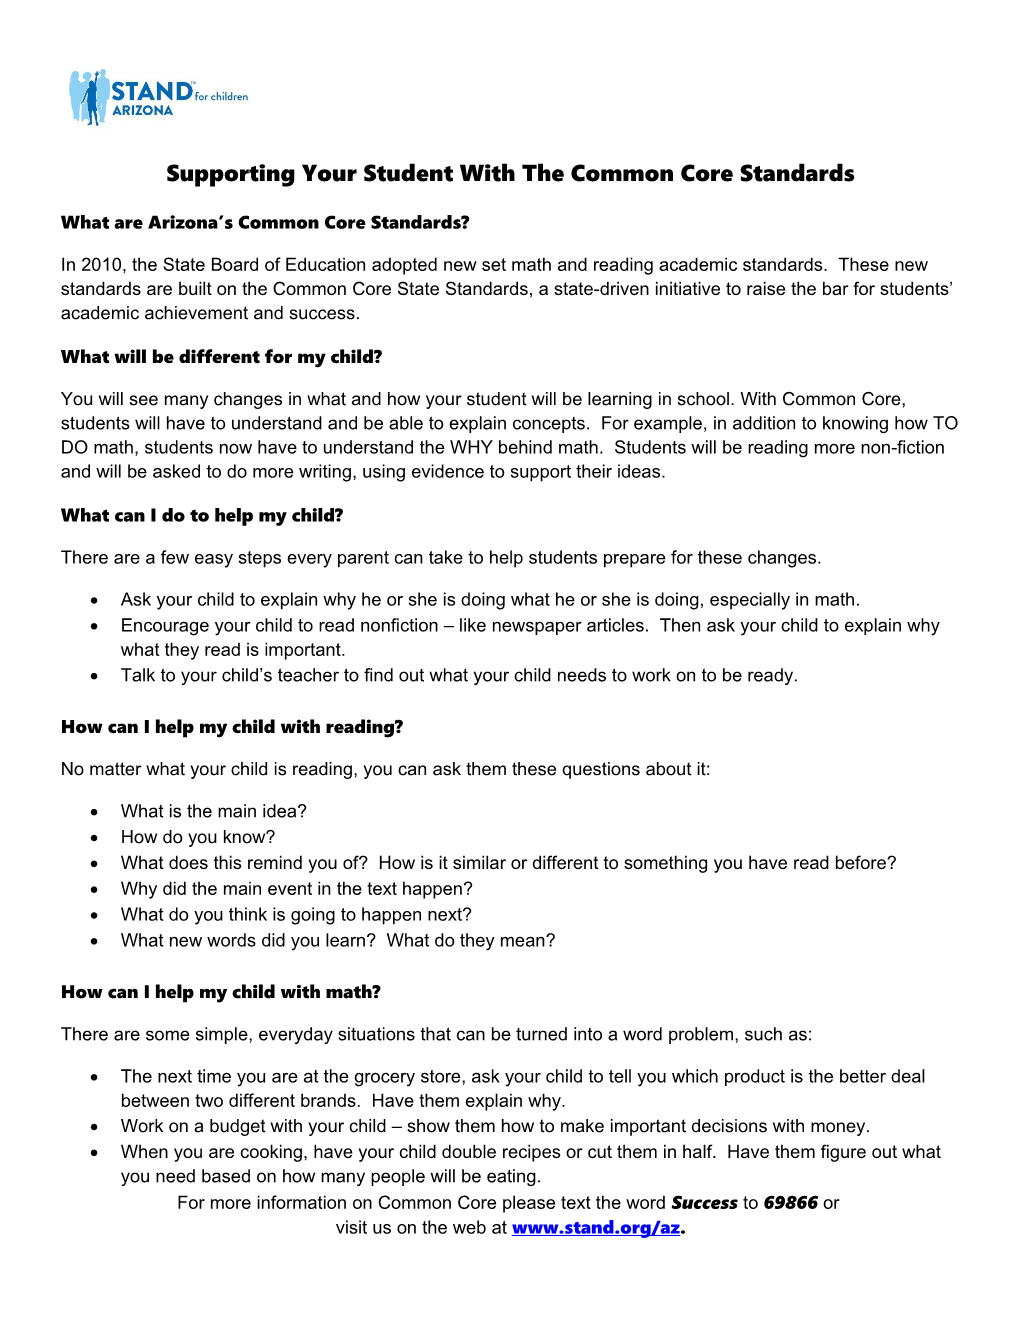 Supporting Your Student with the Common Core Standards